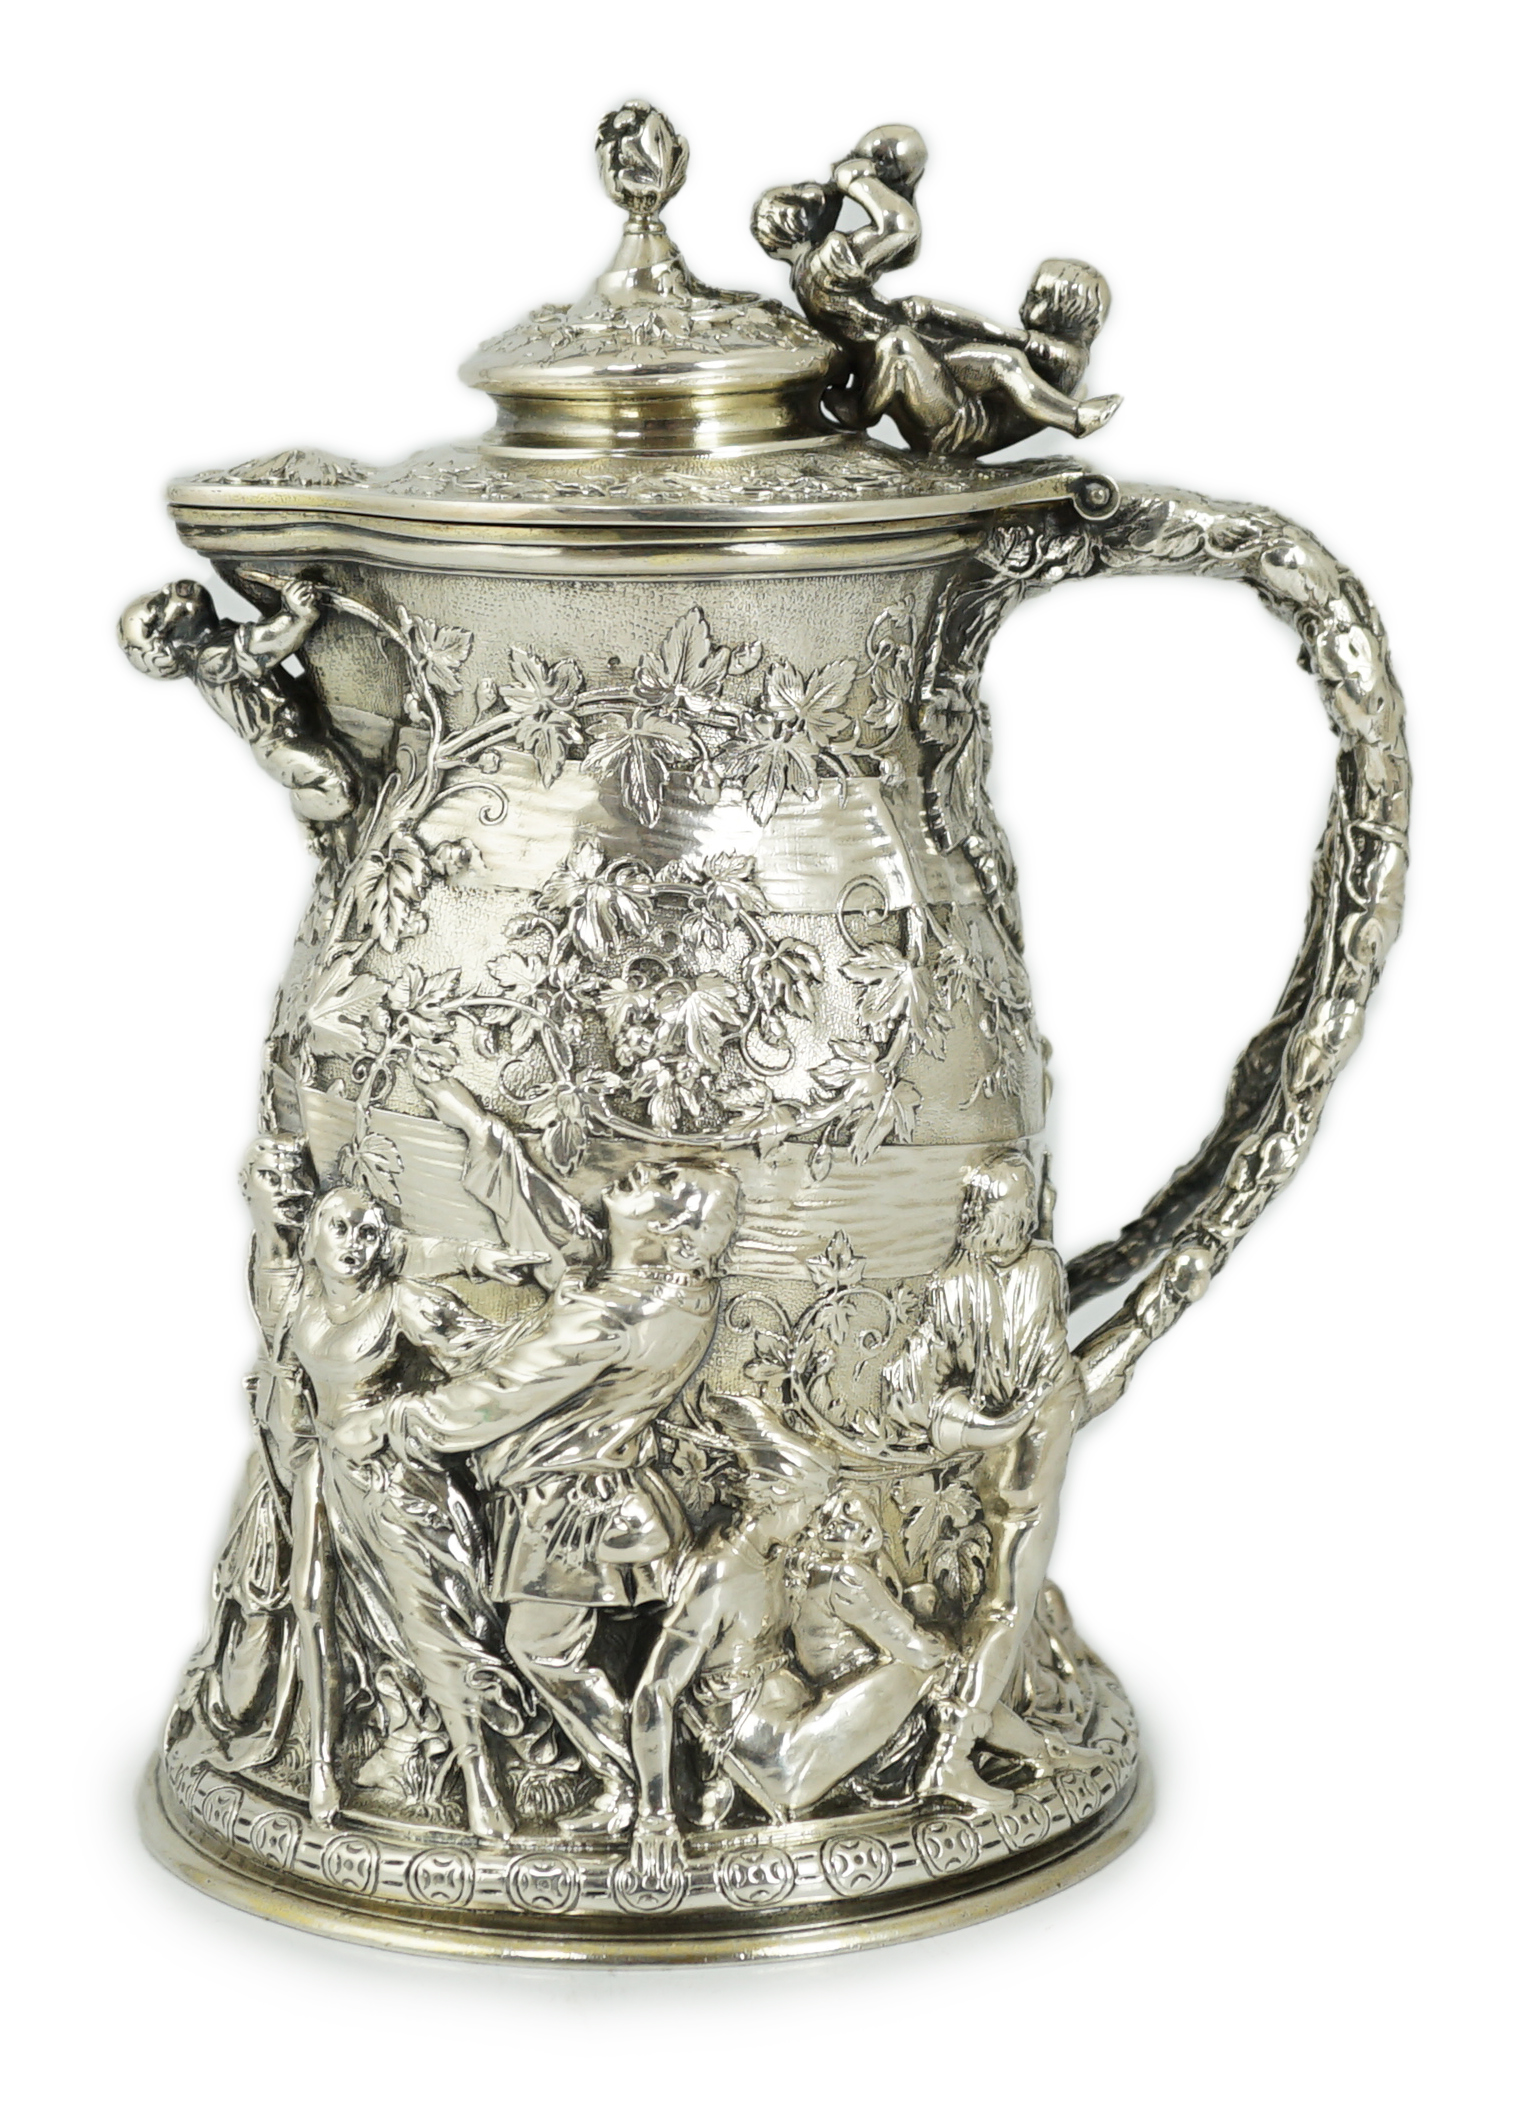 ROYAL INTEREST: A good ornate Victorian Teniers style silver ewer with hinged cover by Frederick Elkington